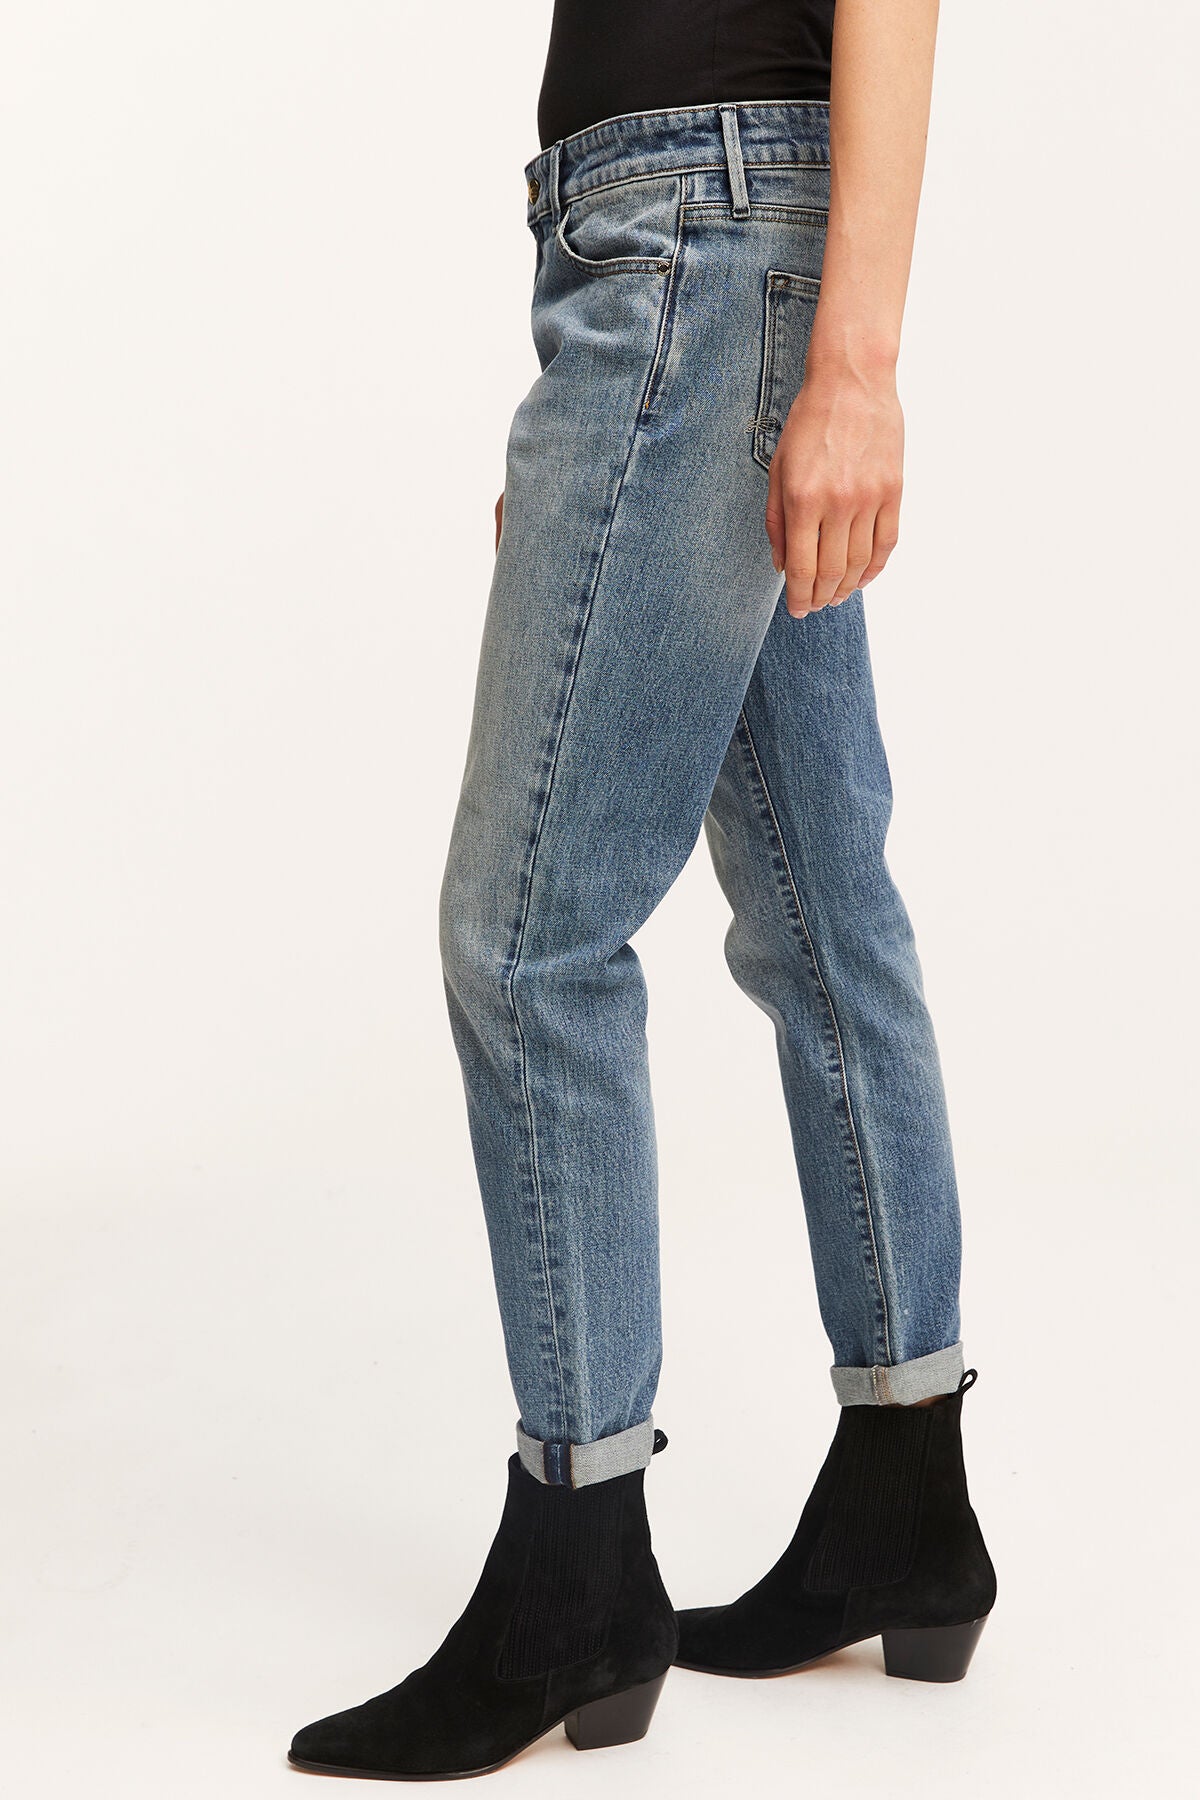 A woman wearing a pair of MONROE Girlfriend - Vintage Indigo Wash jeans made from organic cotton and Denham black boots.